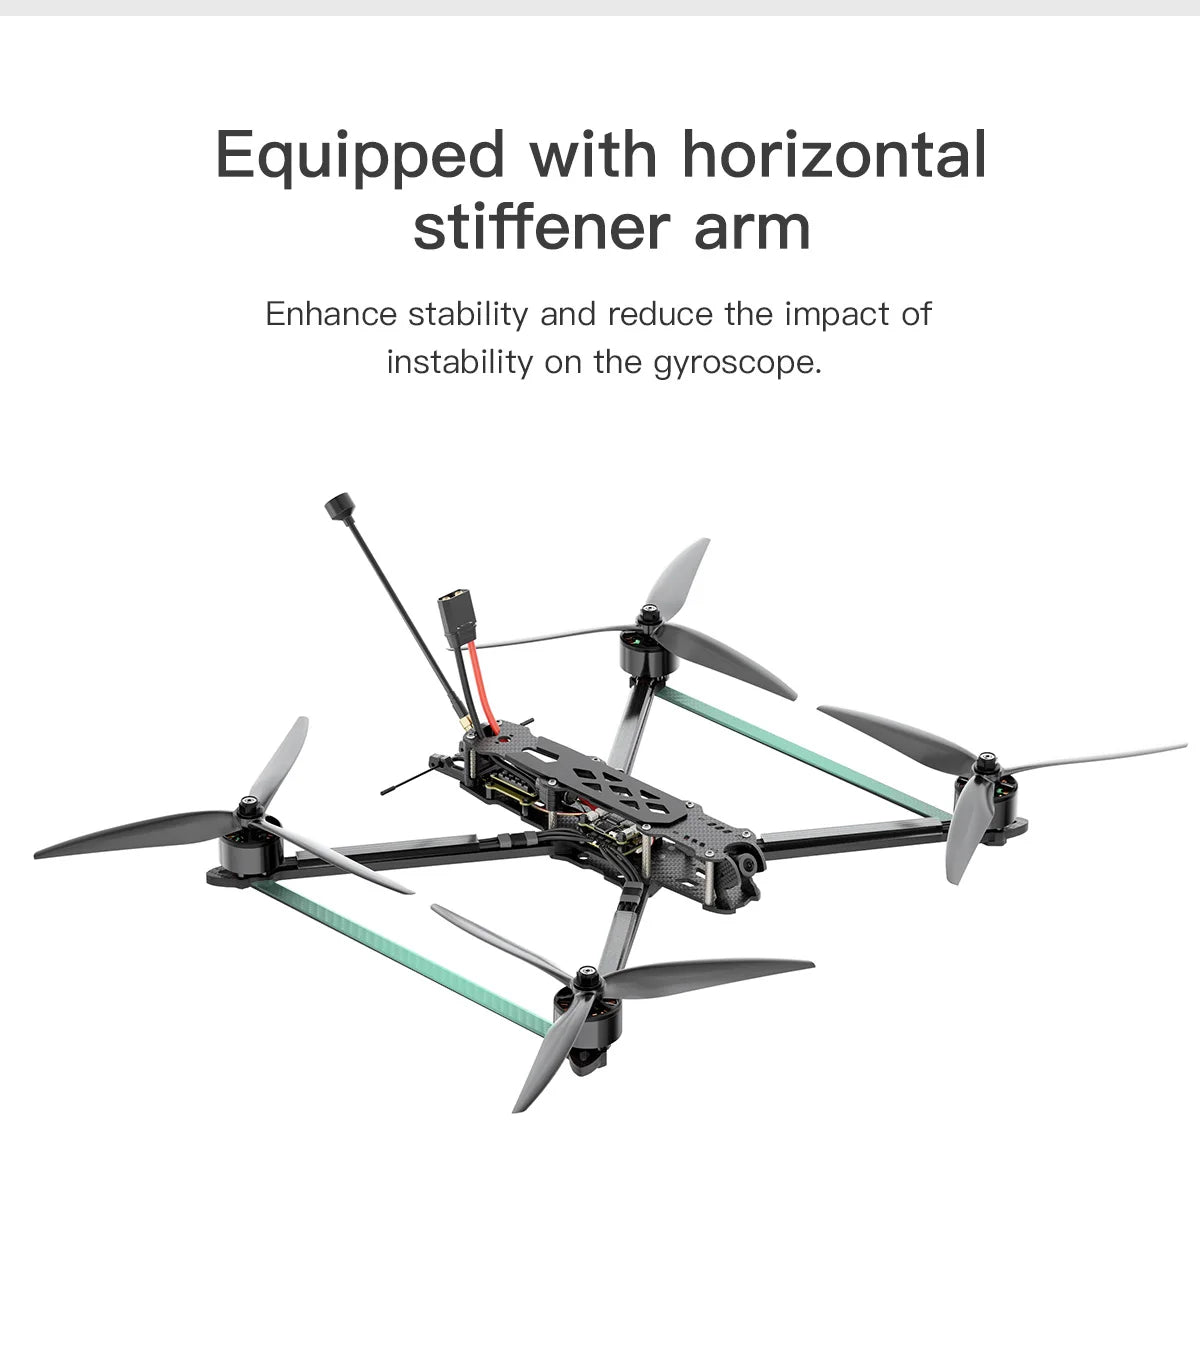 GEPRC MARK4 LR10 1.2G 2W Long Range 10inch Freestyle FPV Drone, Equipped with horizontal stiffener arm Enhance stability and reduce the impact of instability on the